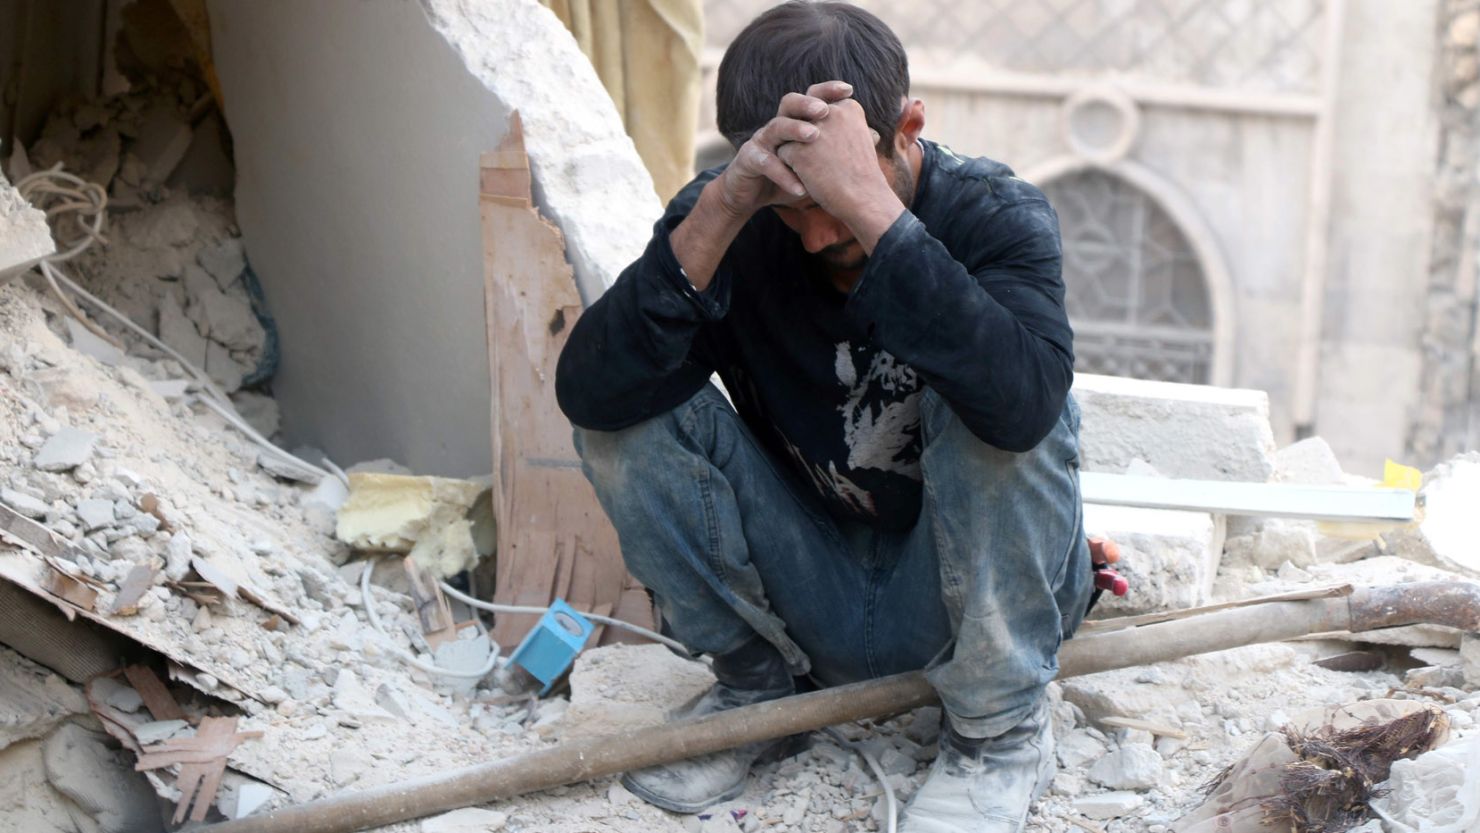 A Syrian man reacts as he sits on the rubble of destroyed buildings following a government forces air strike on the rebel-held neighborhood of Bustan al-Basha in the northern city of Aleppo on October 4.